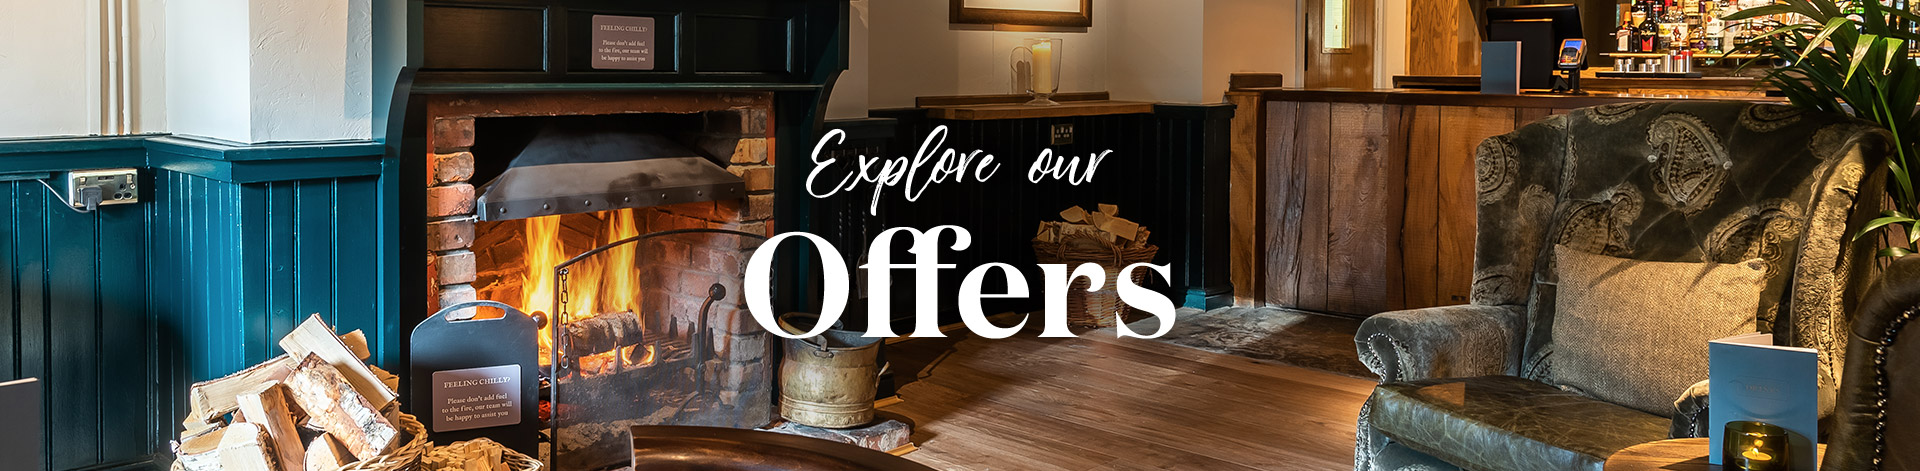 Our latest offers at The Grange Farm